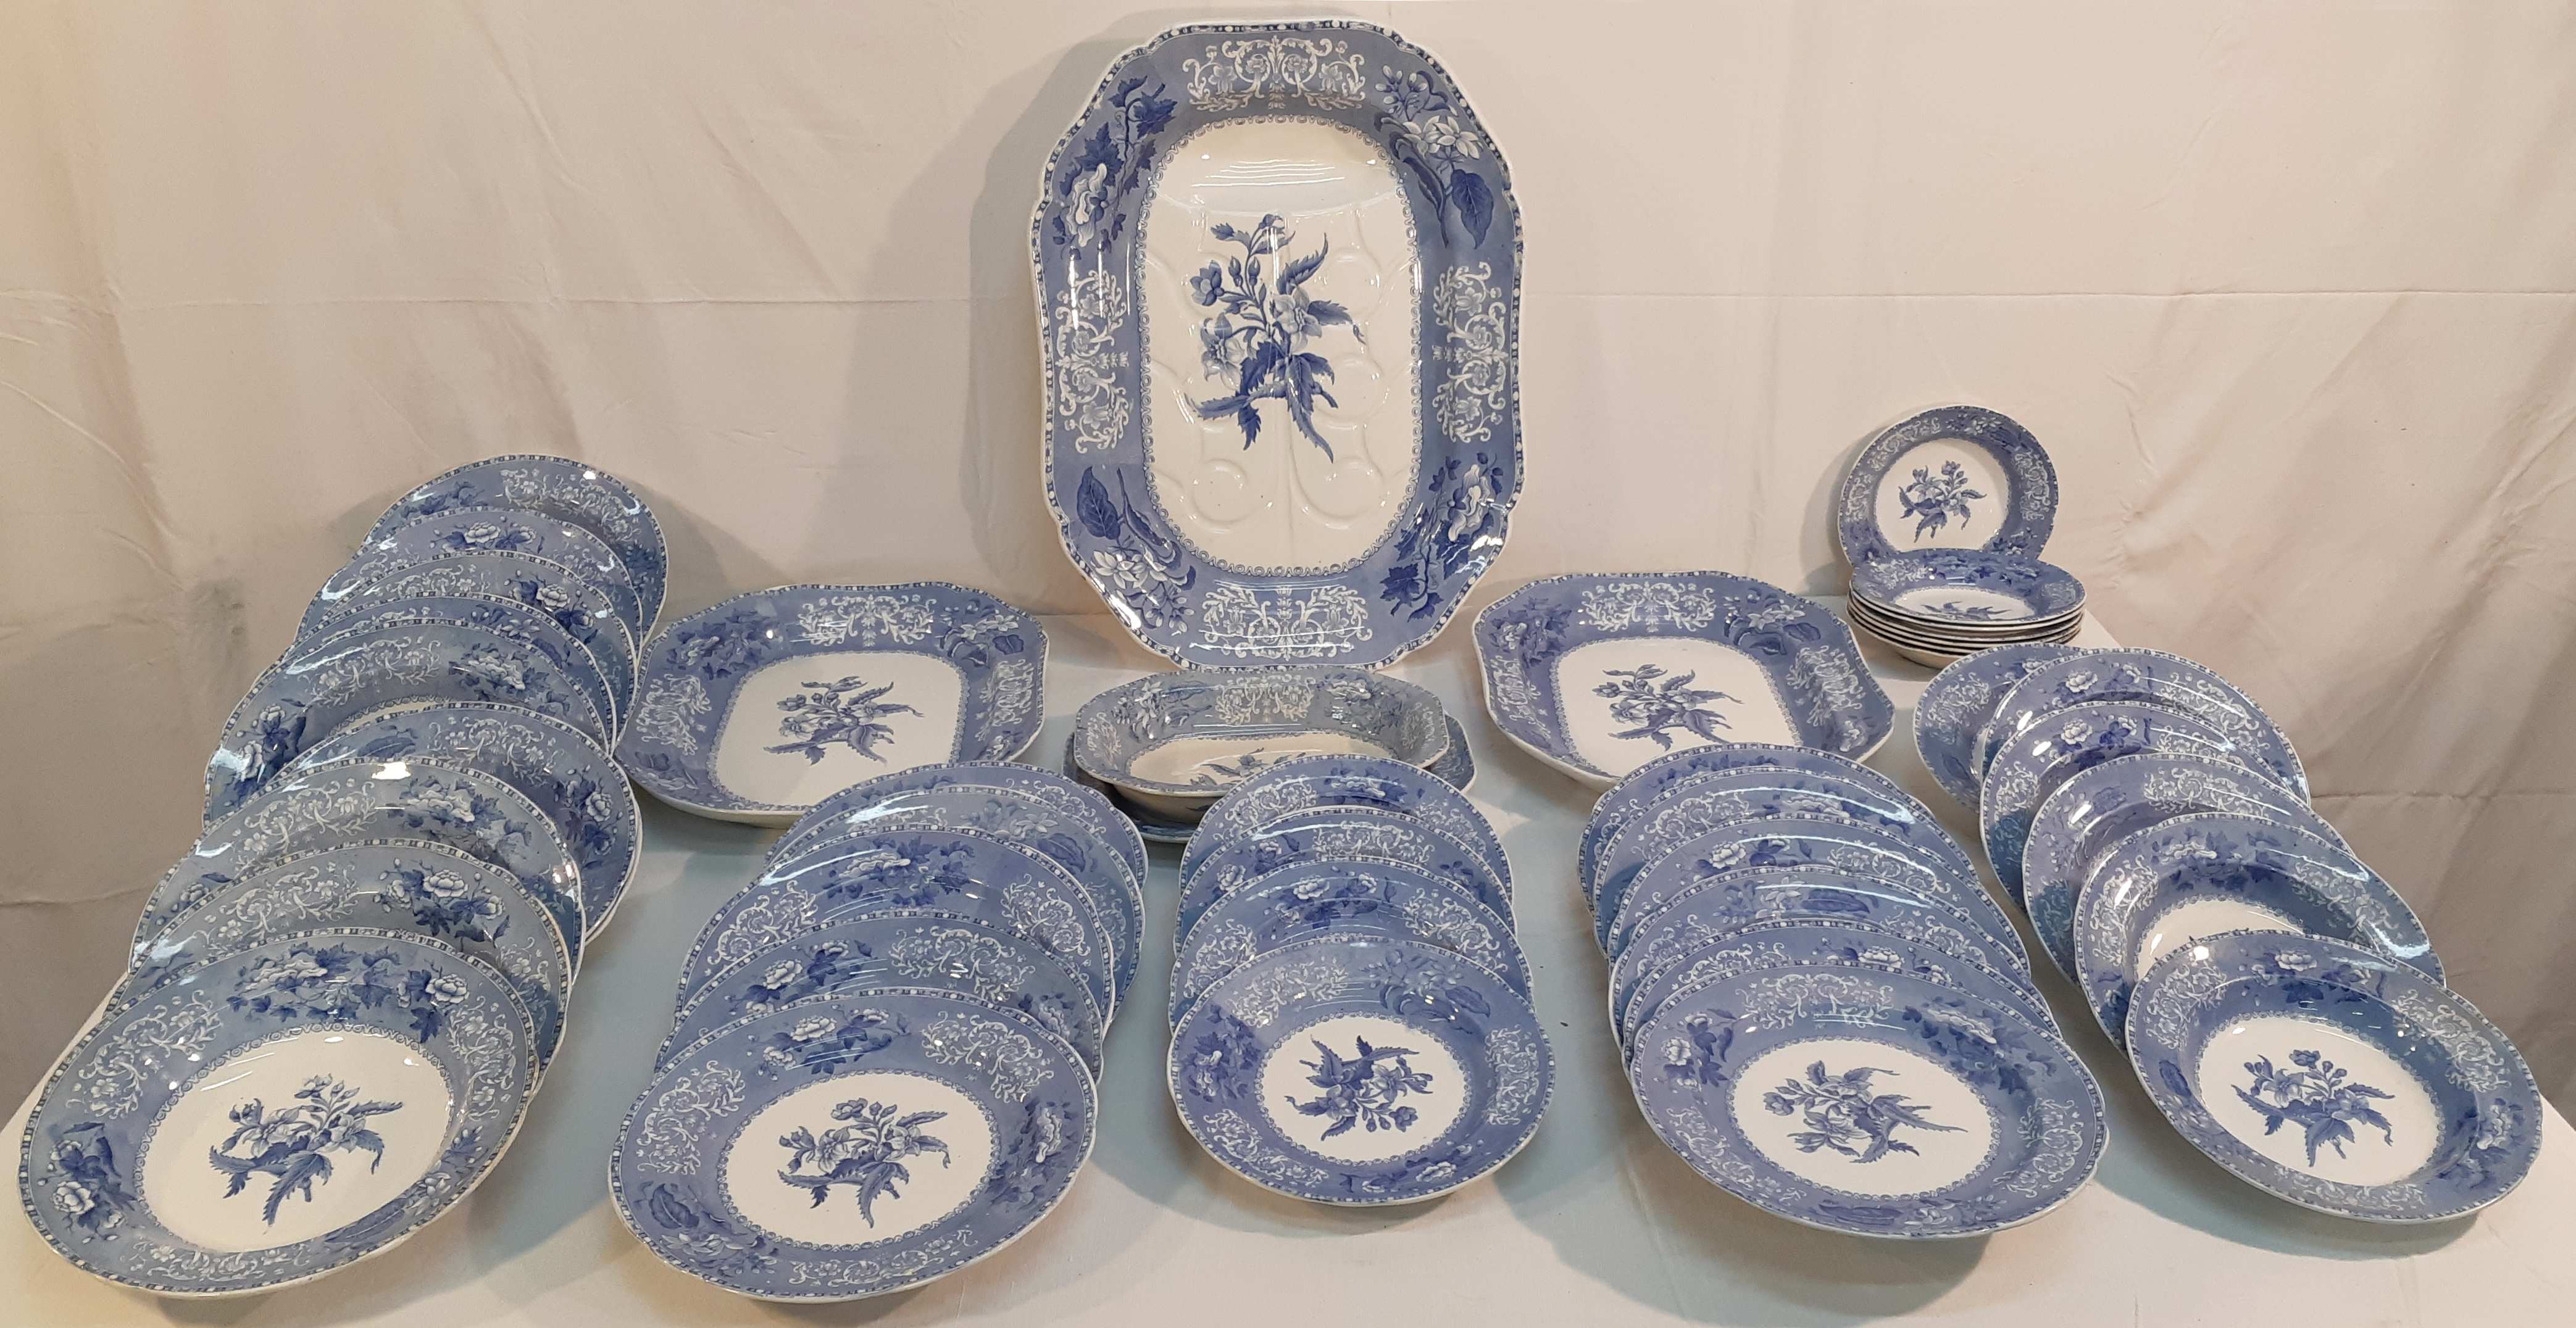 43 PC. BLUE AND WHITE ENGLISH SPODE